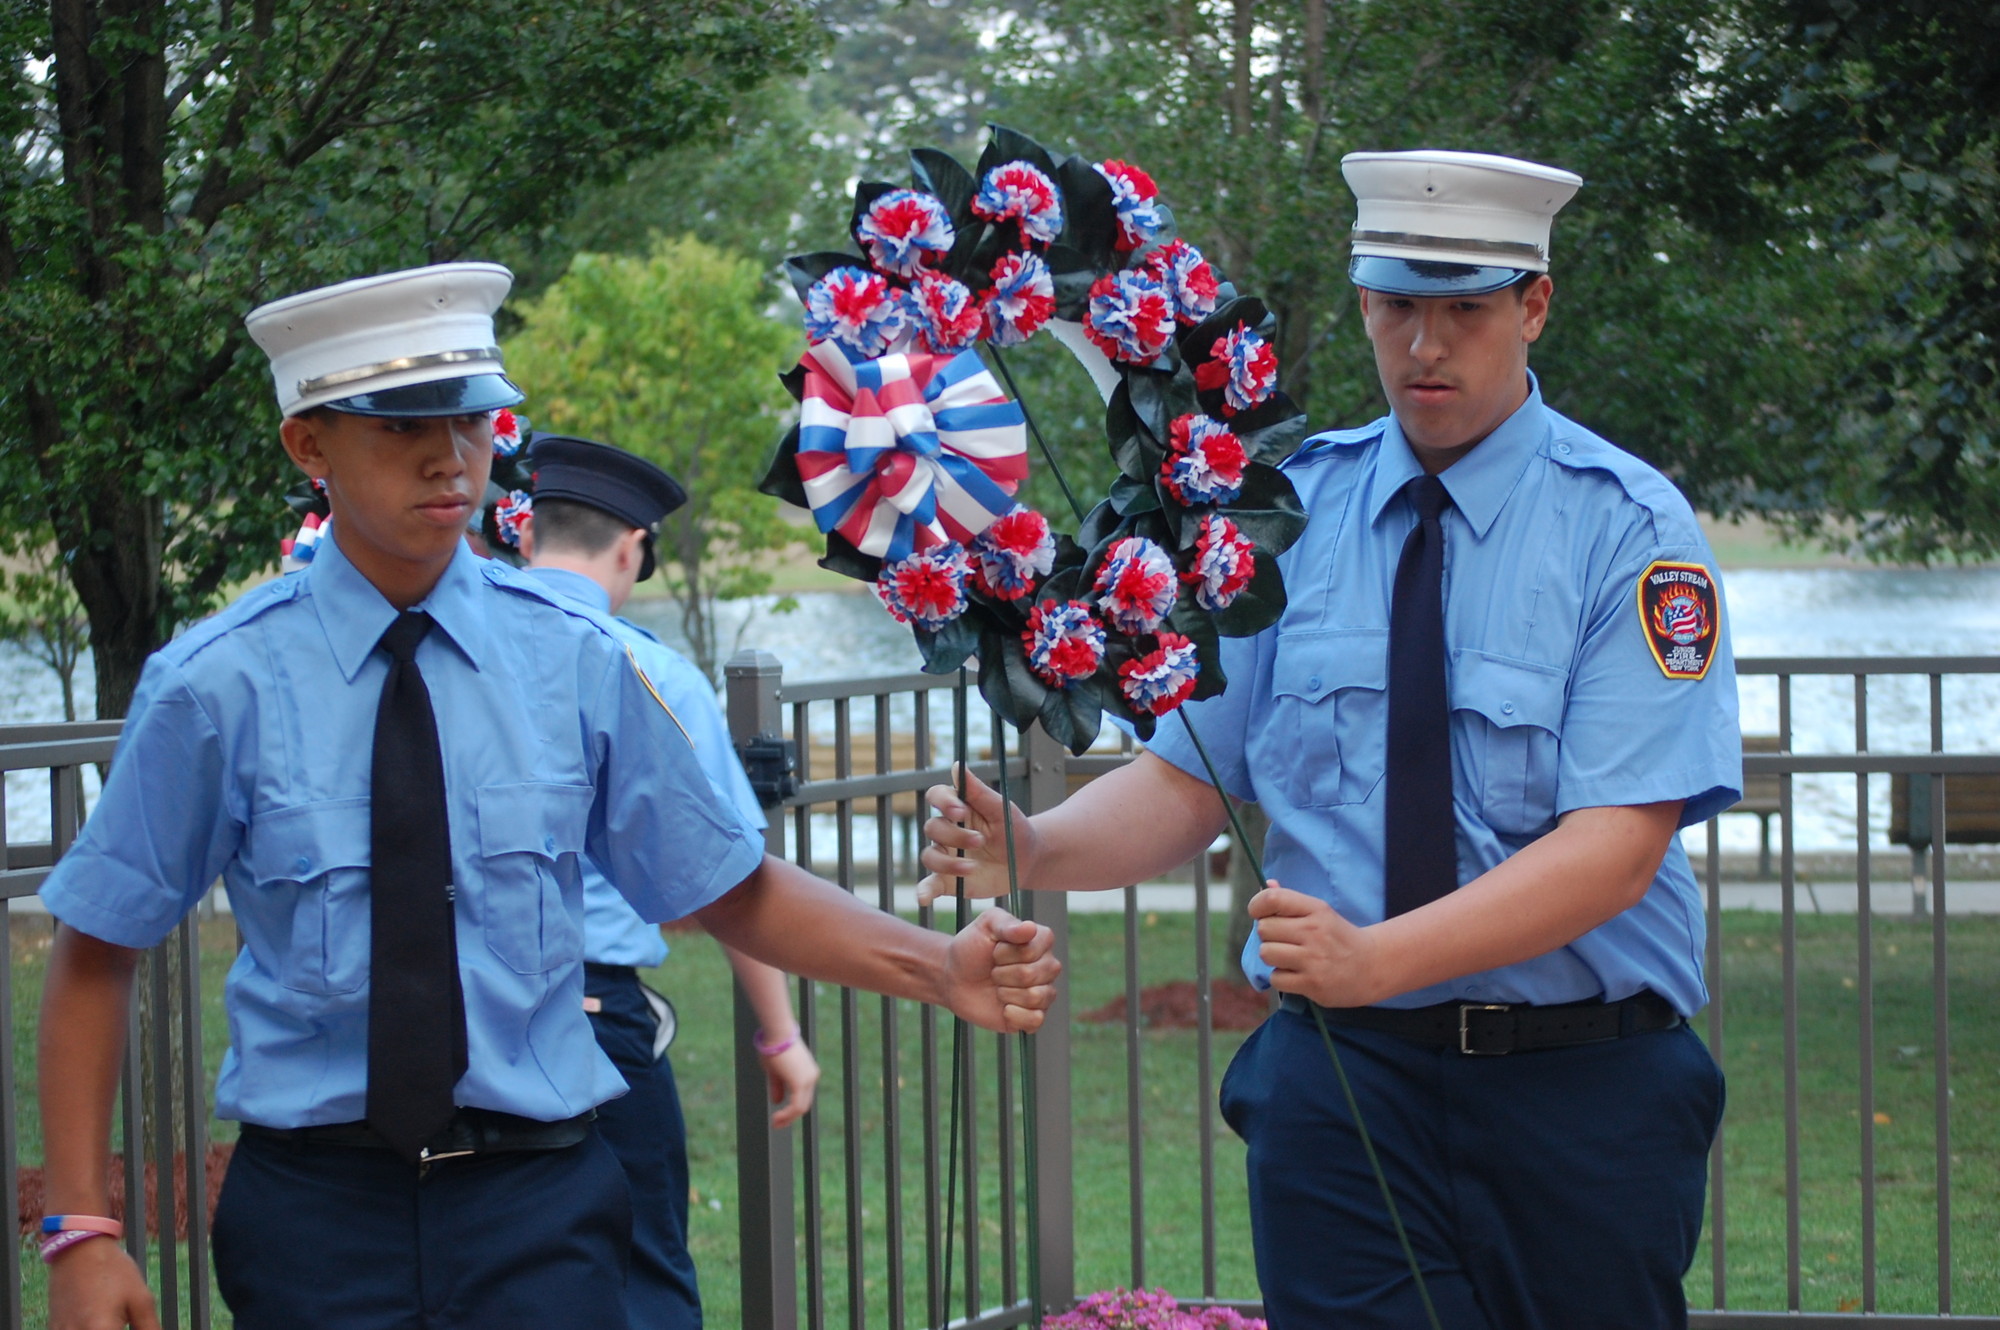 Junior firefighters, including Mike Irizarry, left, and Capt. Richie Field, placed memorial wreaths at the monument in Hendrickson Park.